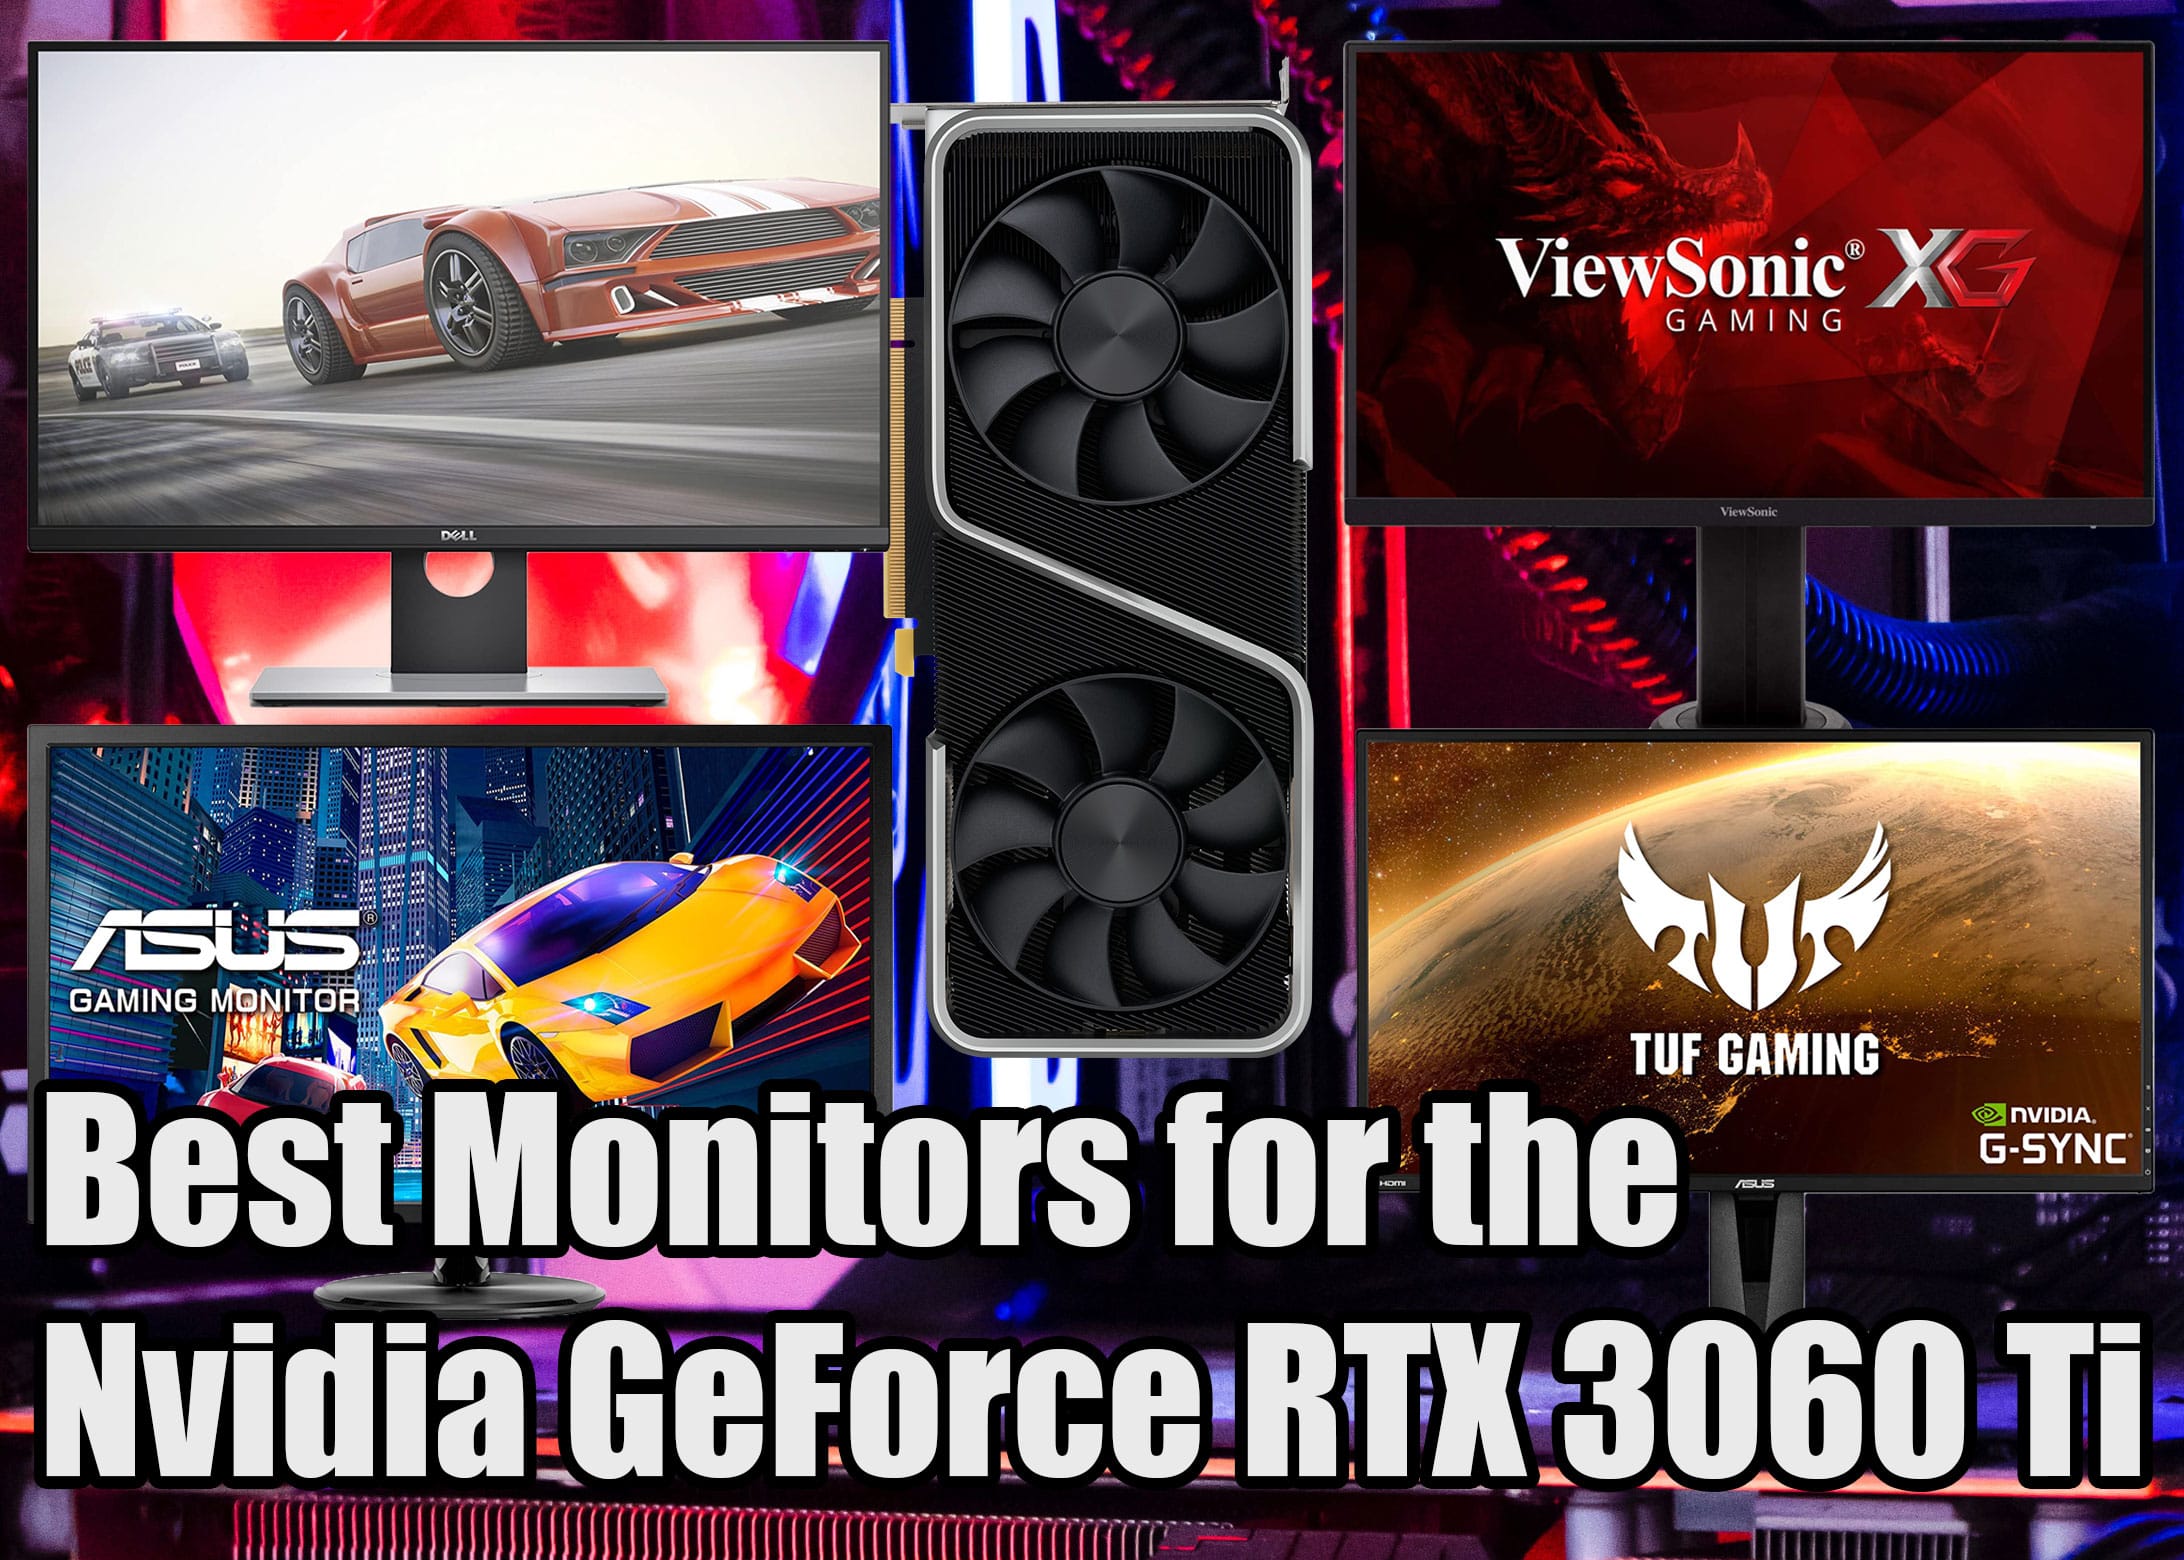 Best Monitors for the Nvidia GeForce RTX 3060 Ti